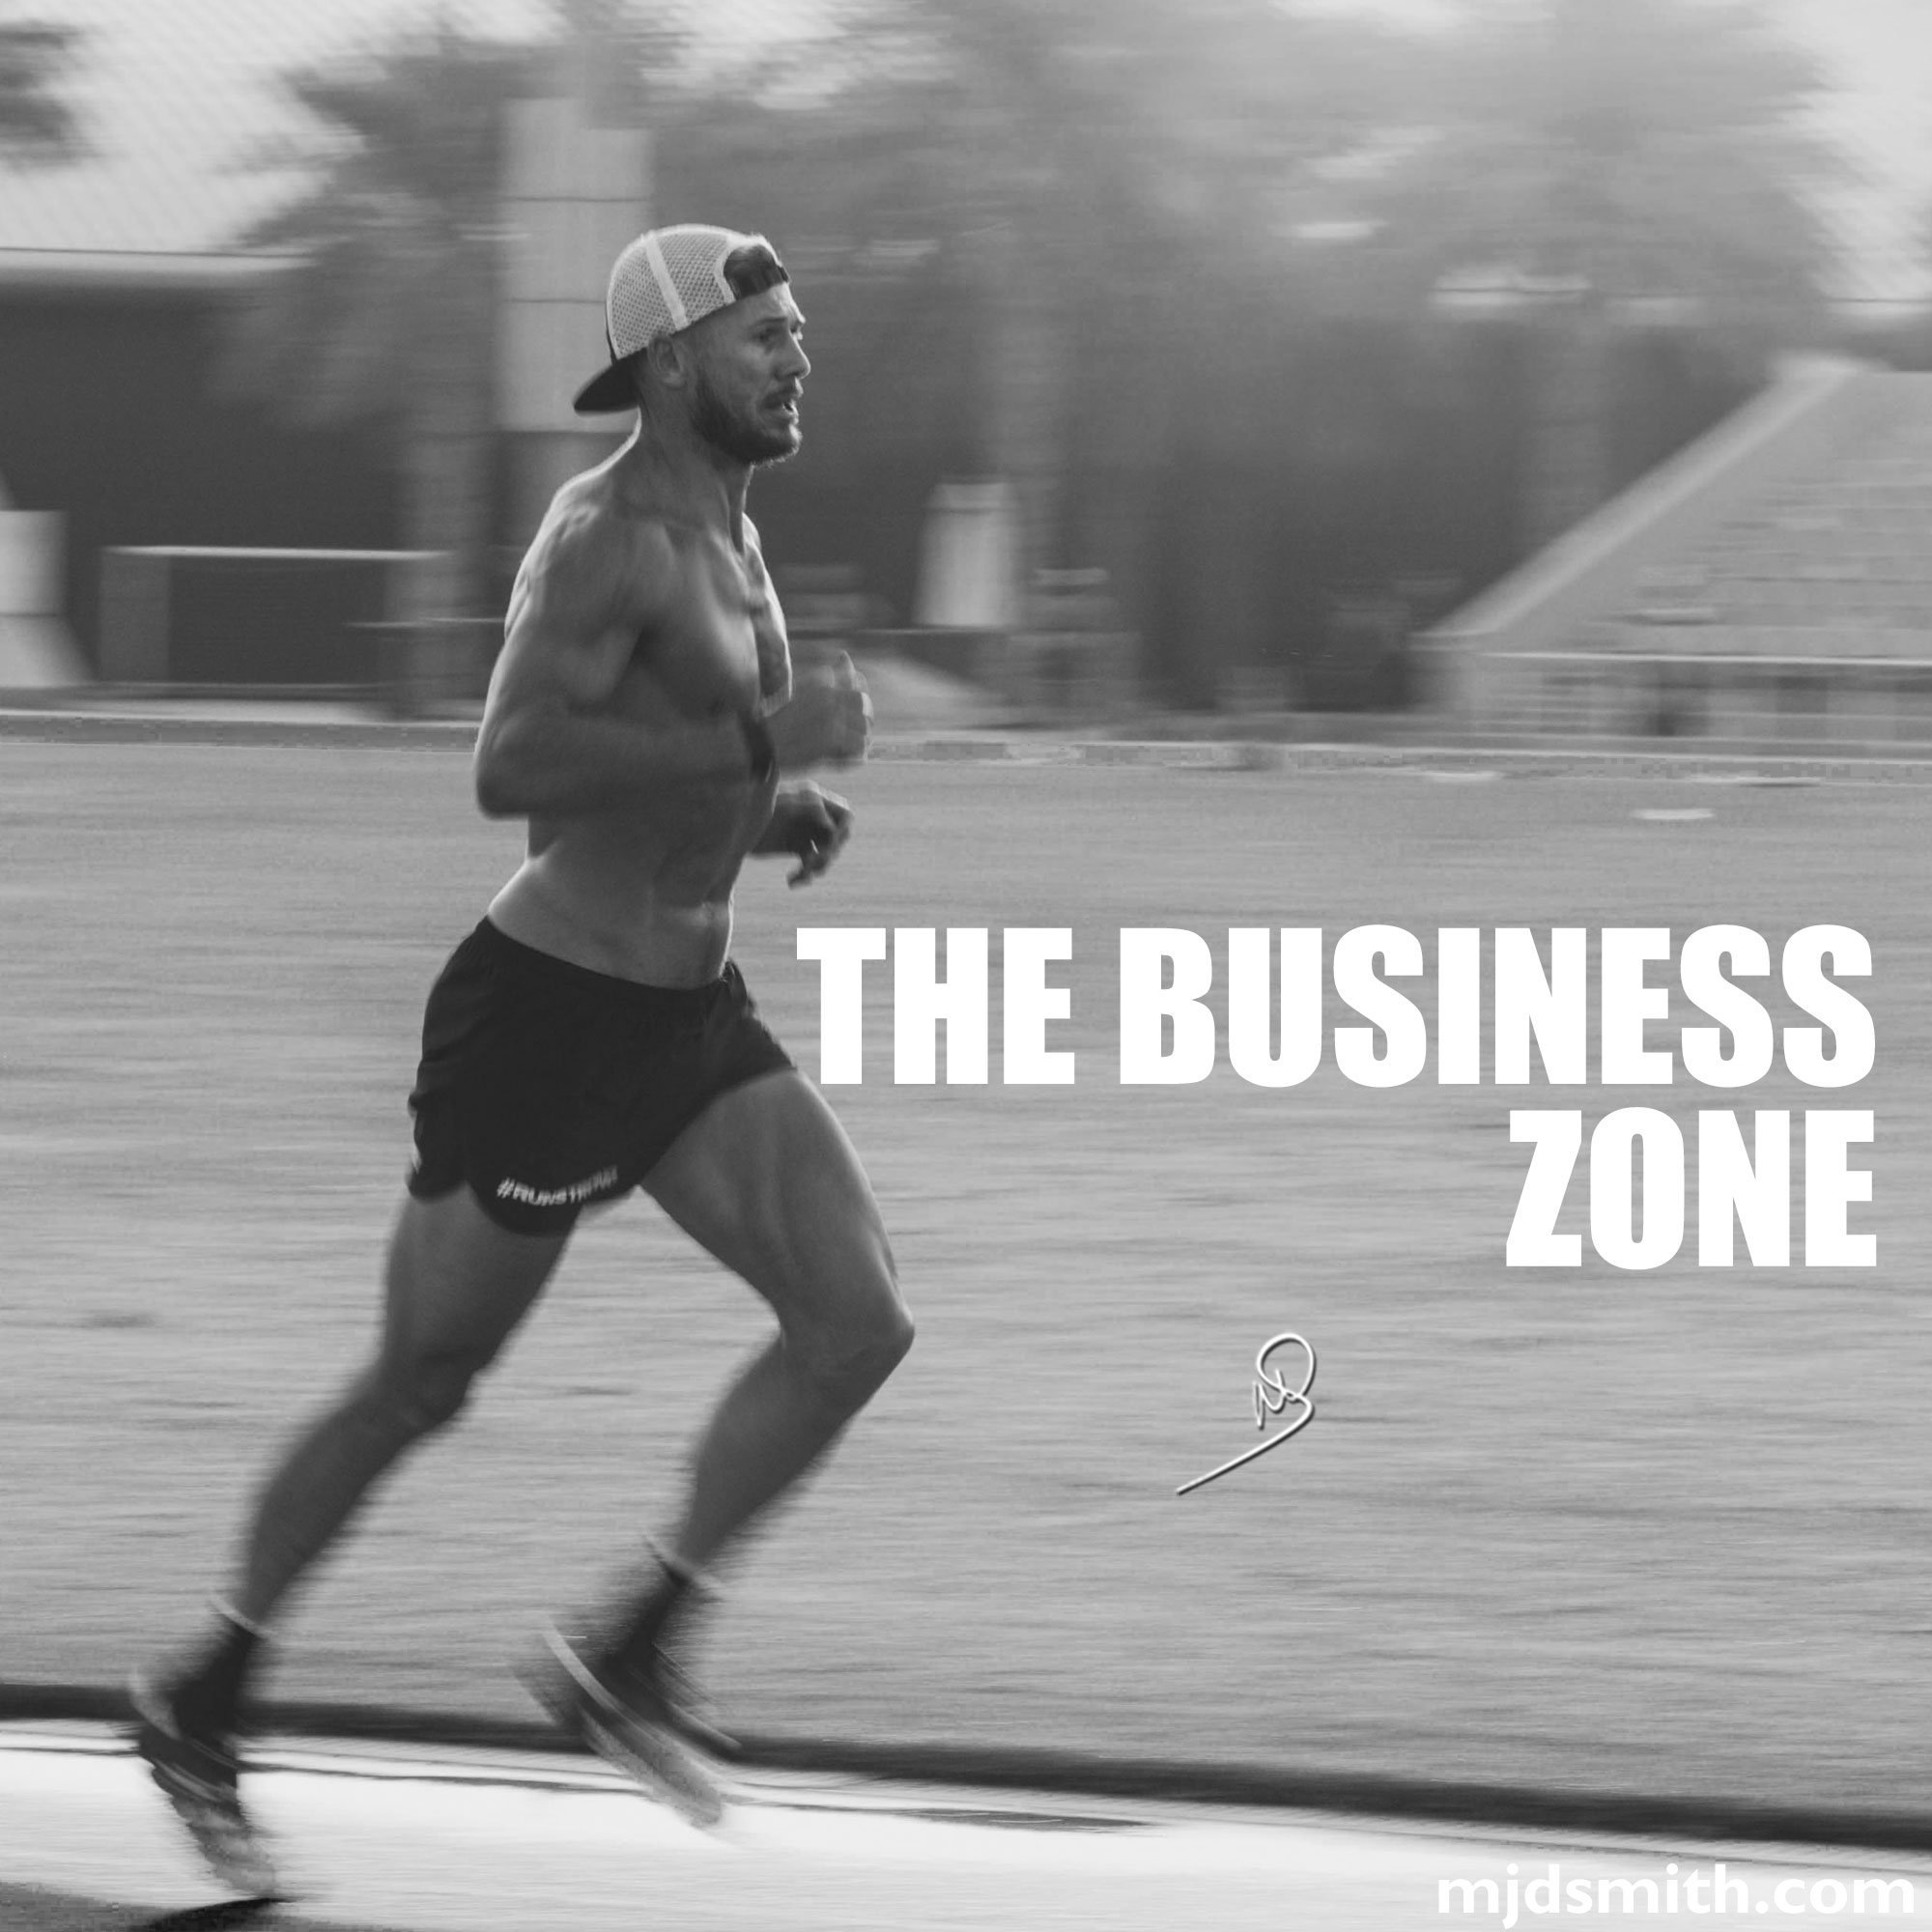 The business zone